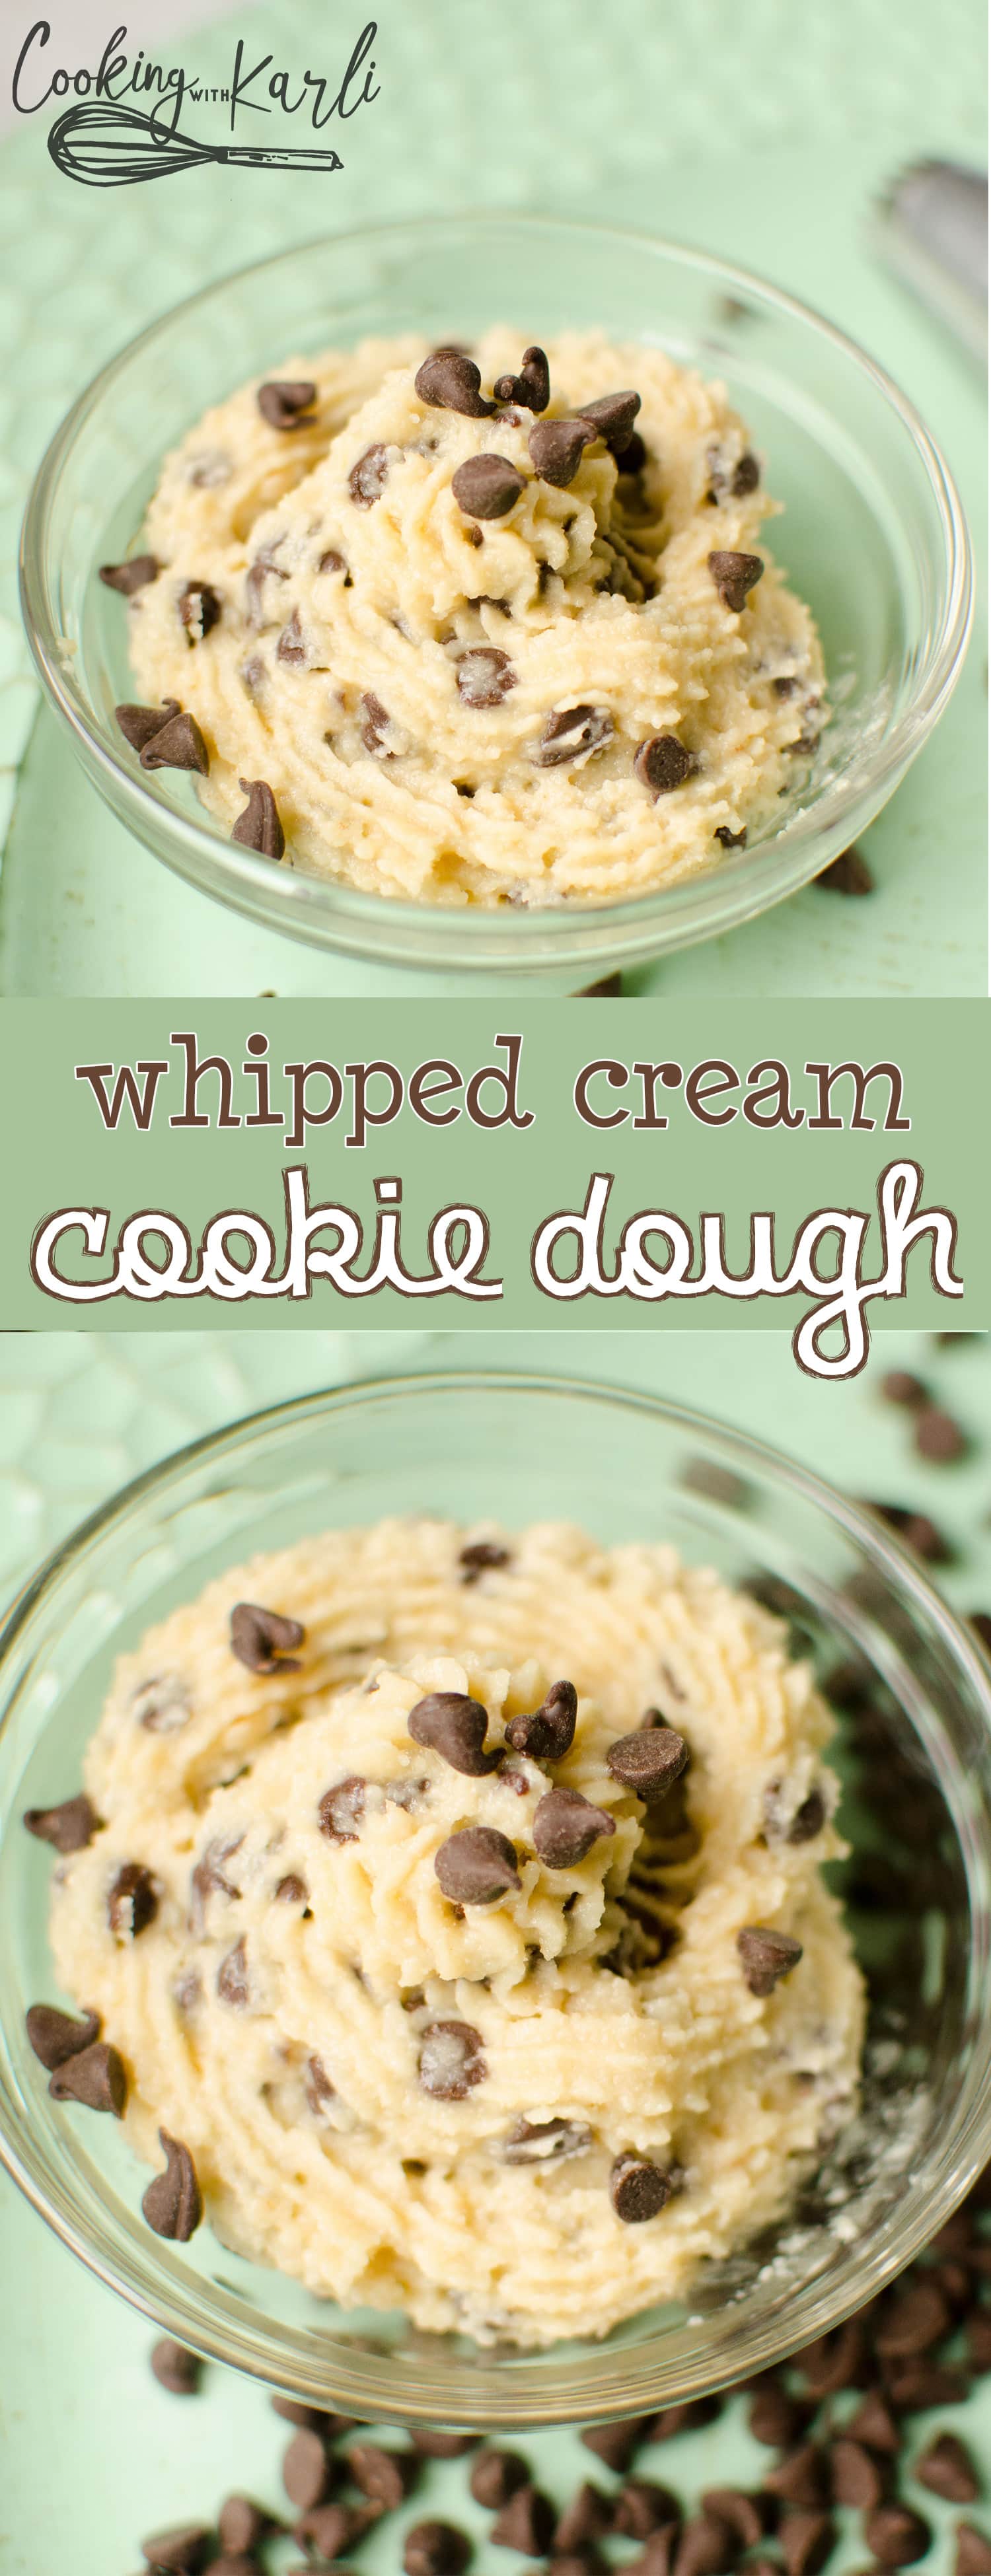 Whipped Cream Cookie Dough is packed with cookie dough flavor, chocolate chips and has the texture of whipped cream. This is great as a filling inside of cupcakes, used as a frosting or eaten with a spoon. |Cooking with Karli| #cookiedough #whippedcream #frosting #filling #dip #recipe #dessert